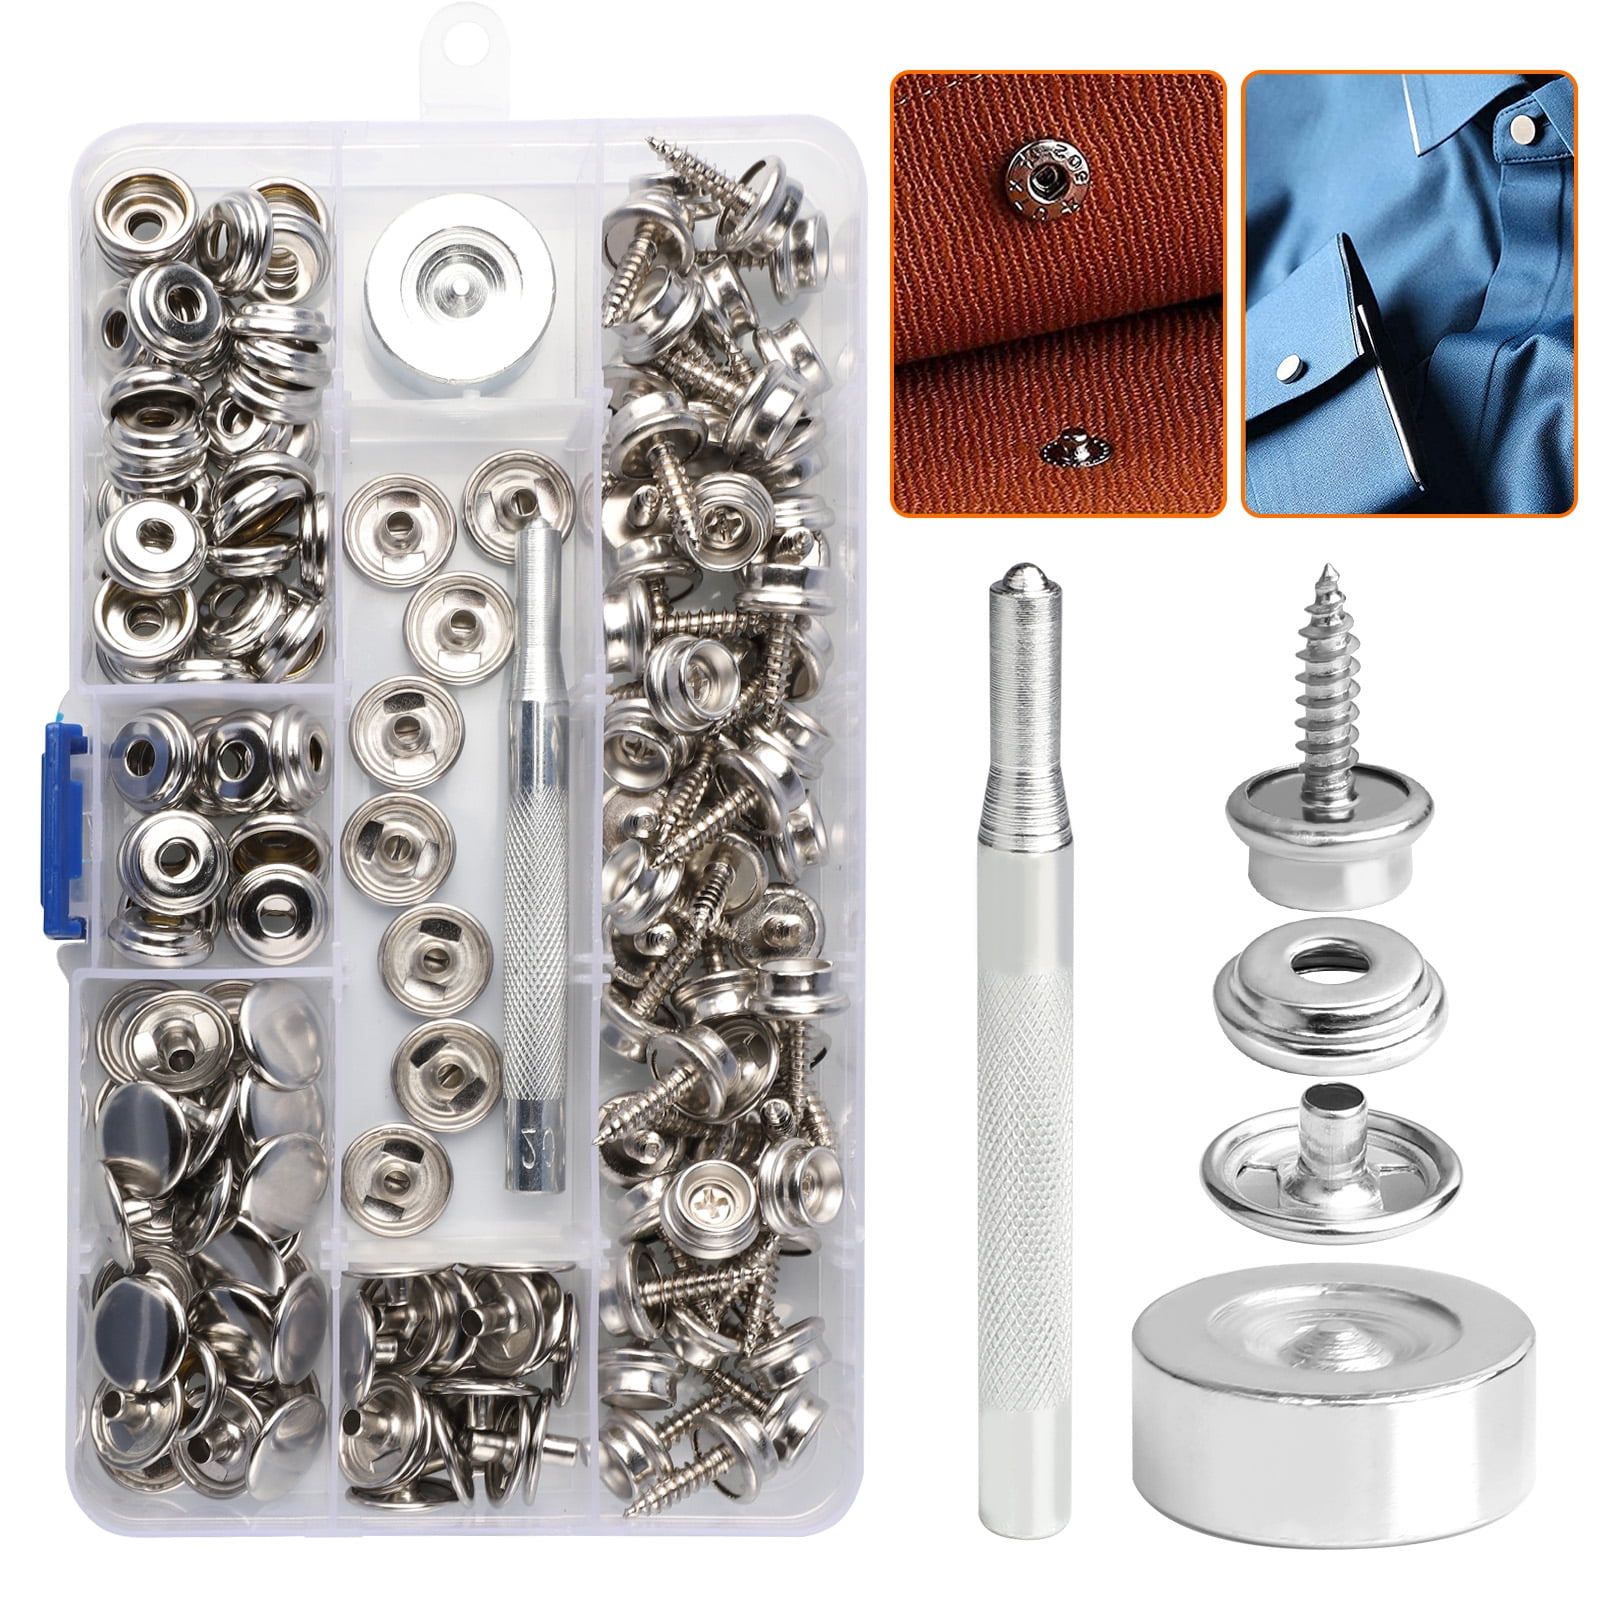 Hapden 160 Pcs Snap Buttons,Snap Fasteners Kit 15mm Stainless Steel Snaps Marine Grade Boat Canvas Snaps,3/8 Socket Metal Snaps for Clothing Leather Boat